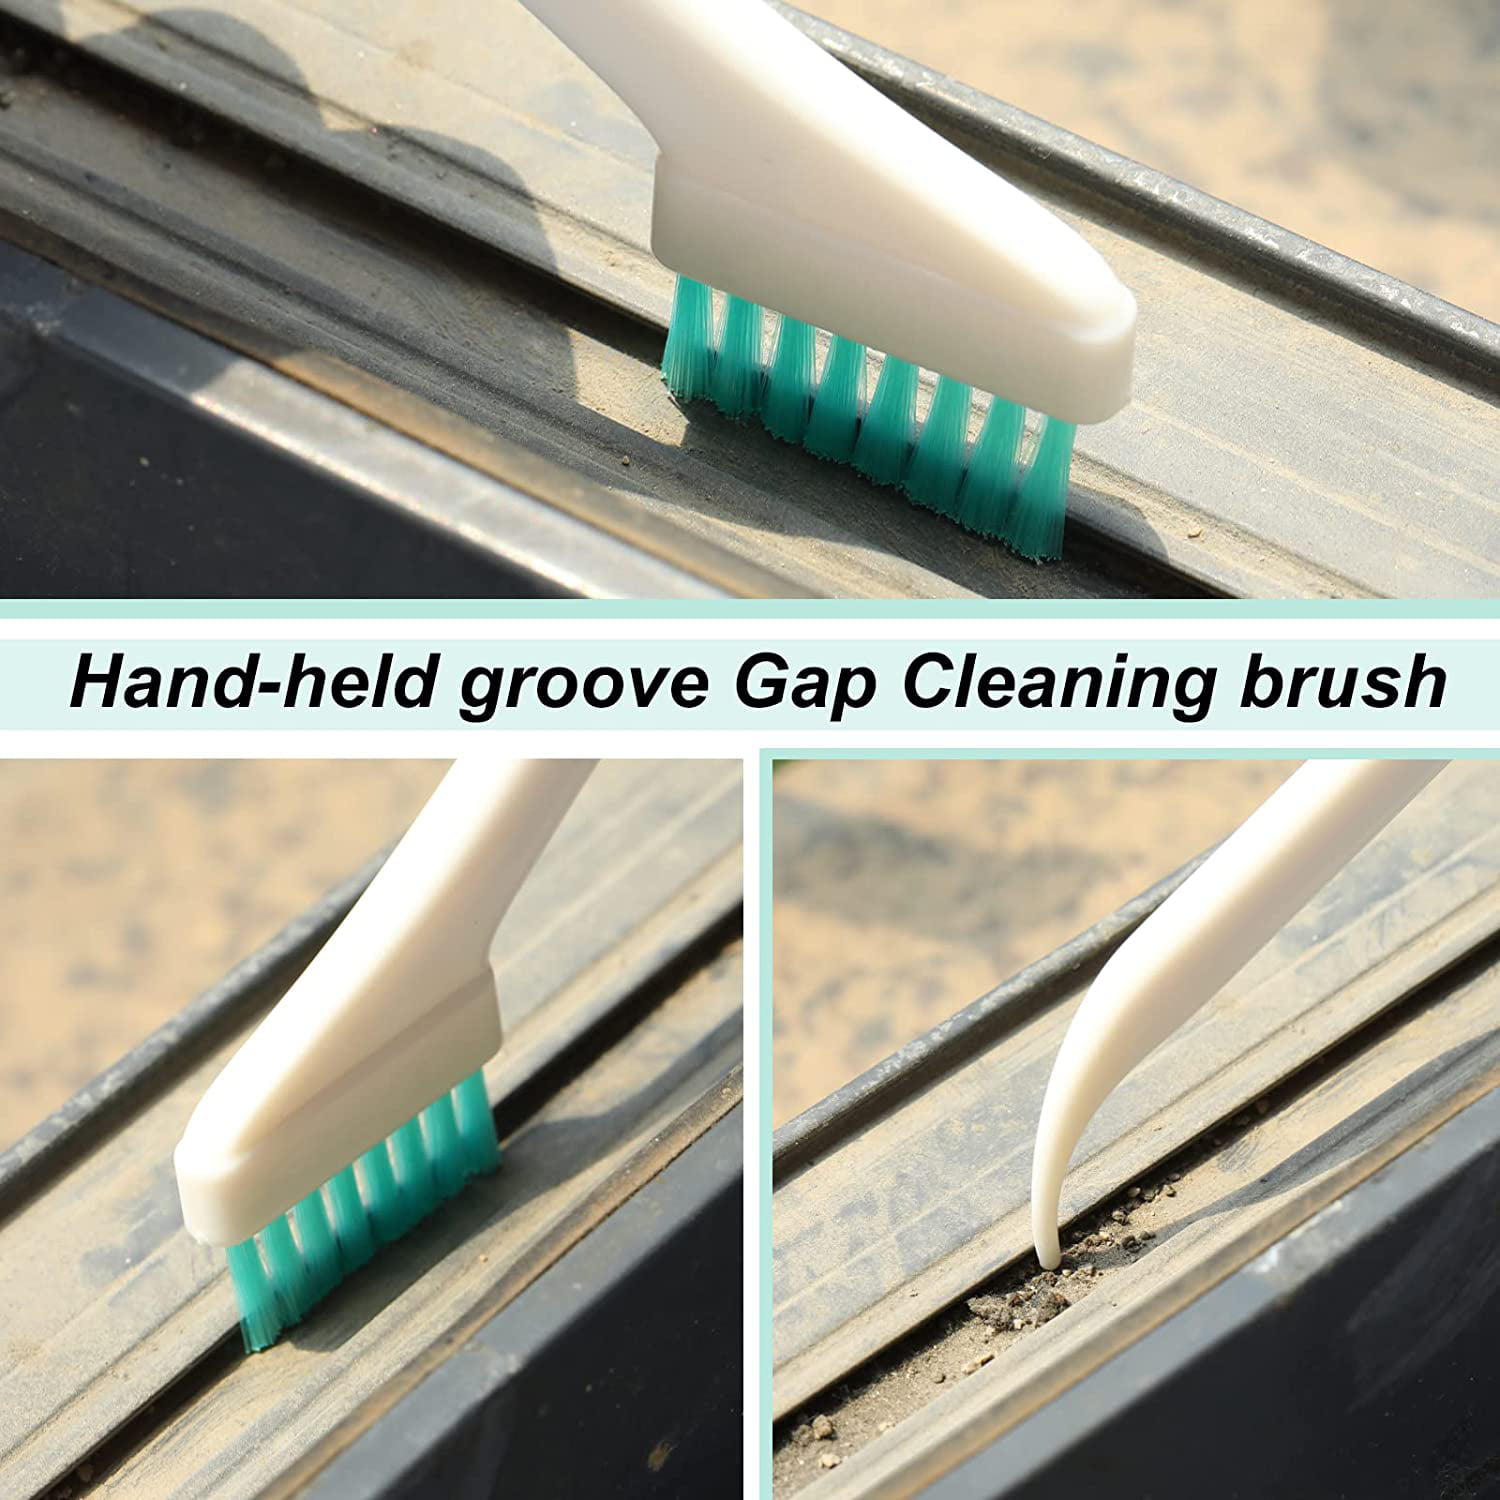 3pcs/set, Tiny Window Door Track Groove Gap Cleaning Scrub Brush Set,  Utility Deep Detail Scrubber Cleaner Tool With Thin Handles For Small Hole  Corner Spaces Of Bottle Caps, Grout, Tile, Keyboard